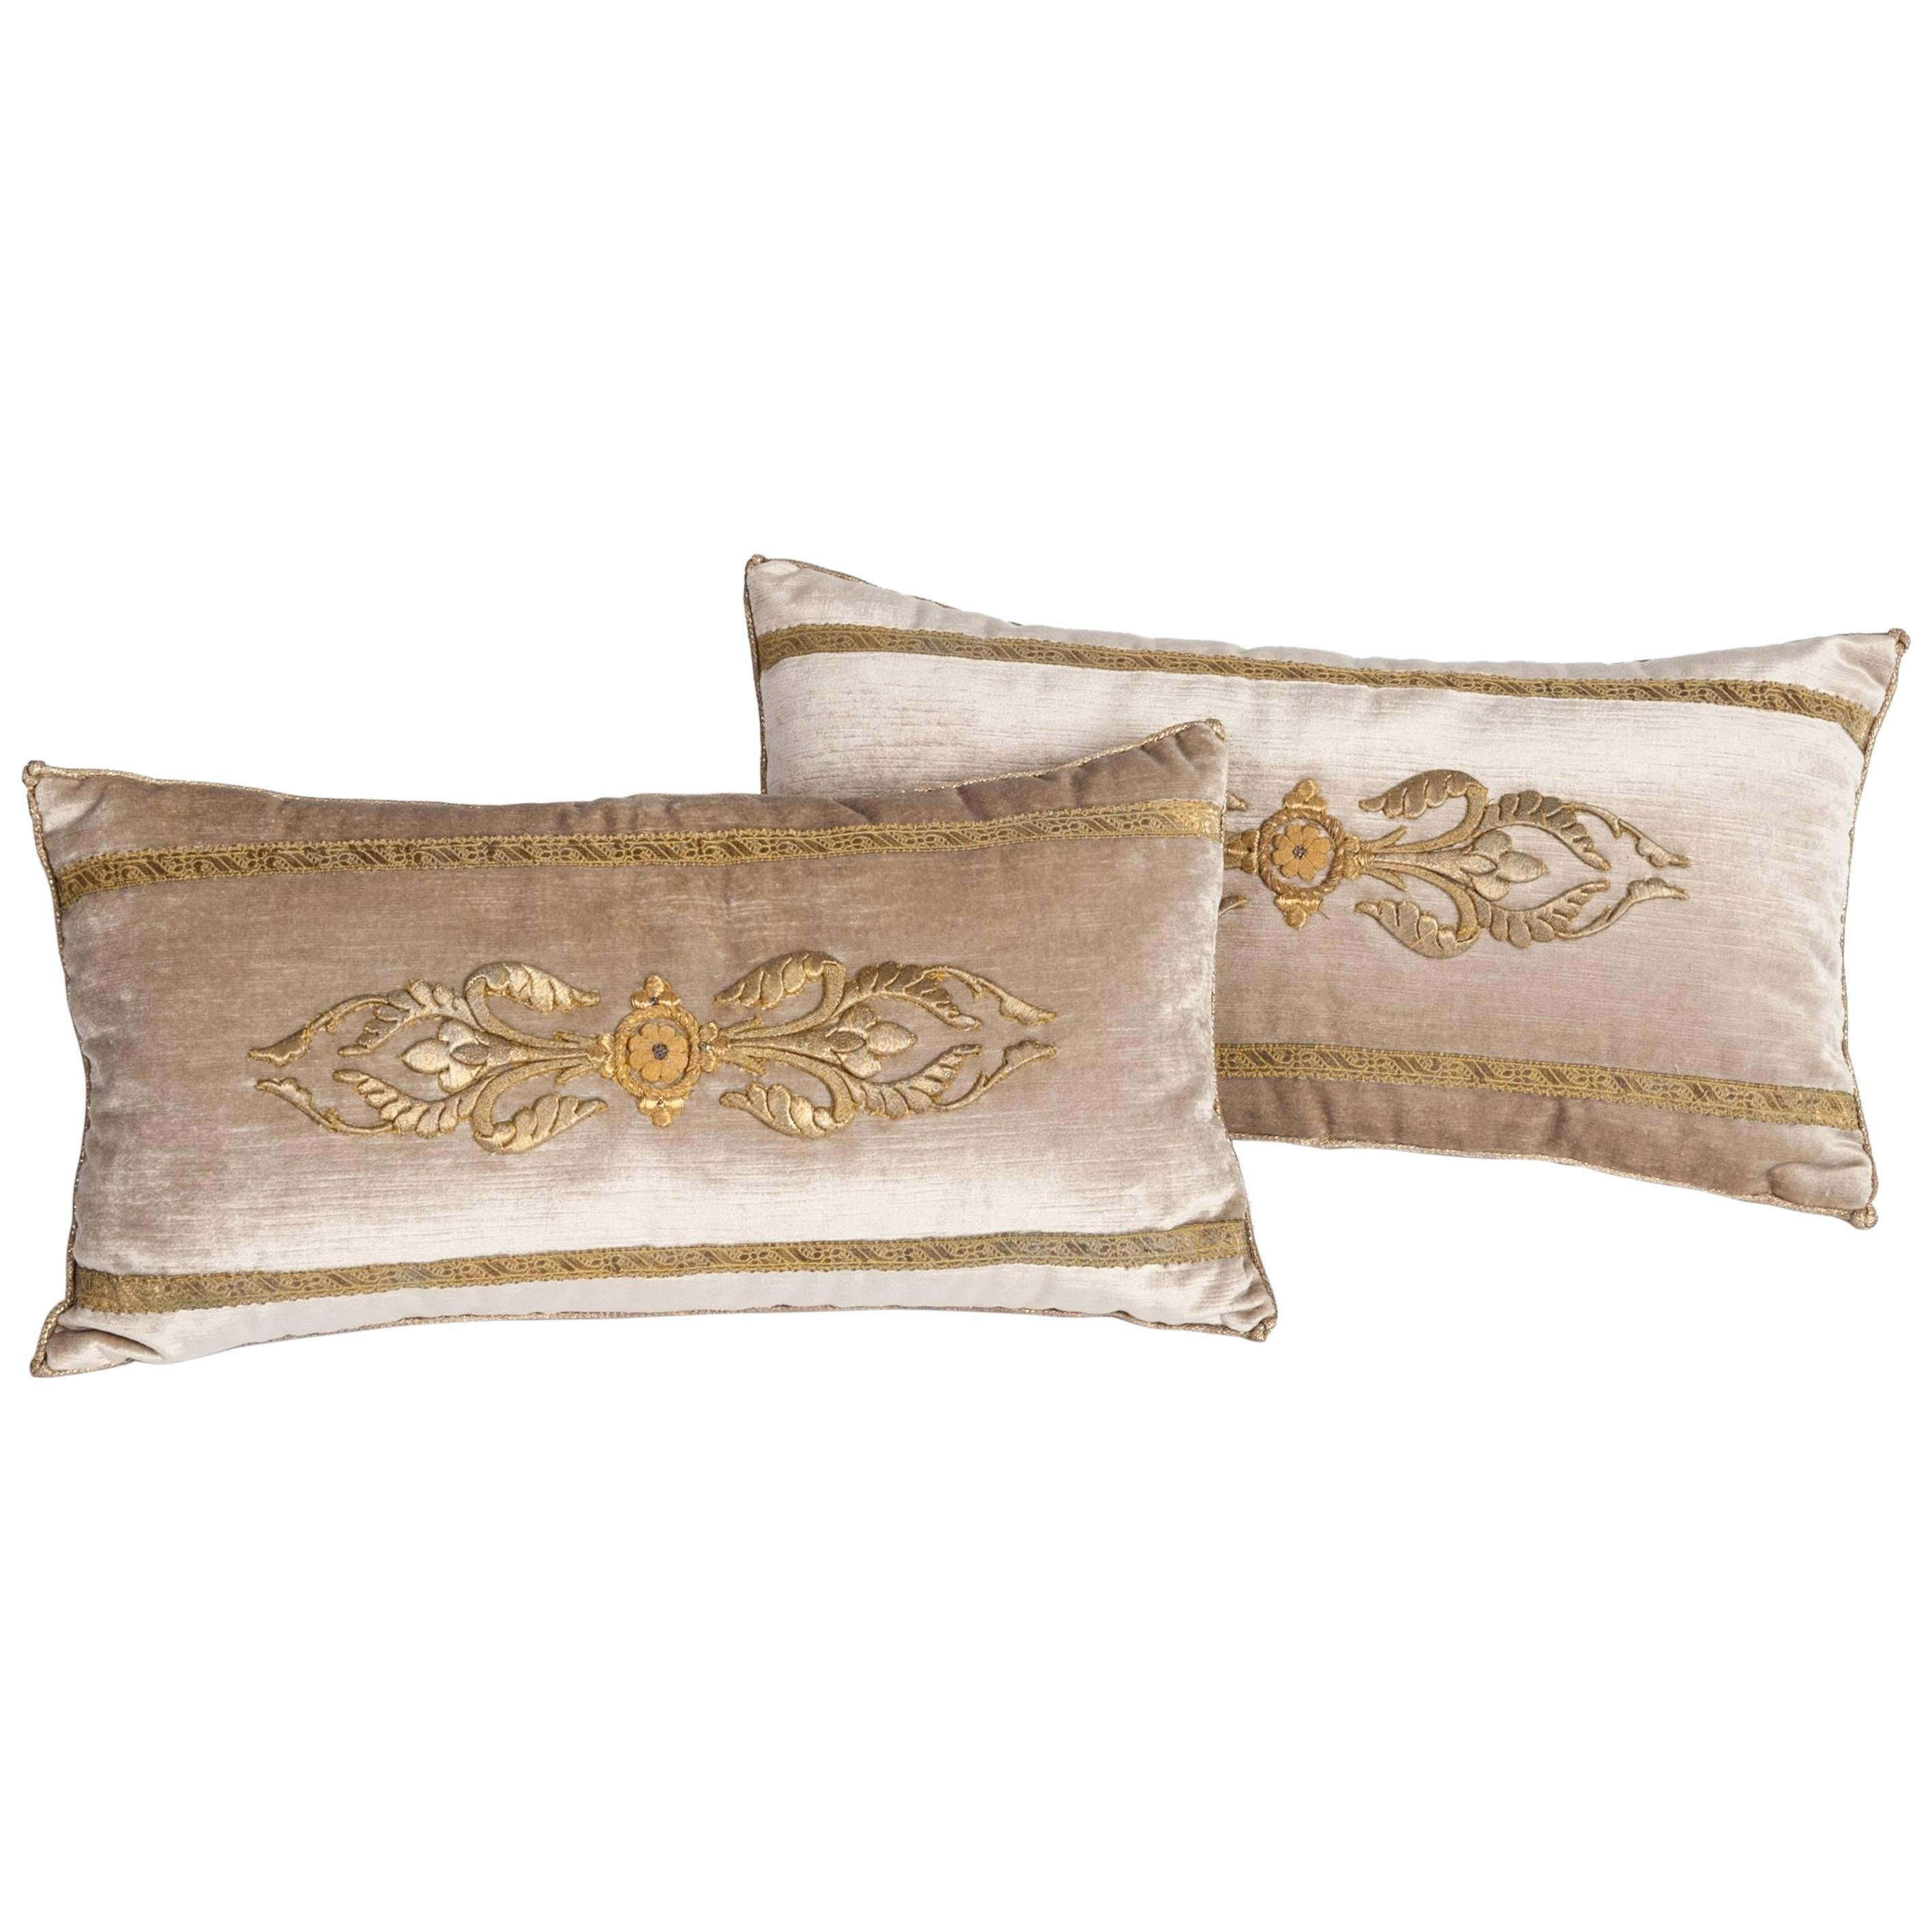 Pair of Champagne-Beige Colored Velvet Pillows with Antique Metallic Embroidery